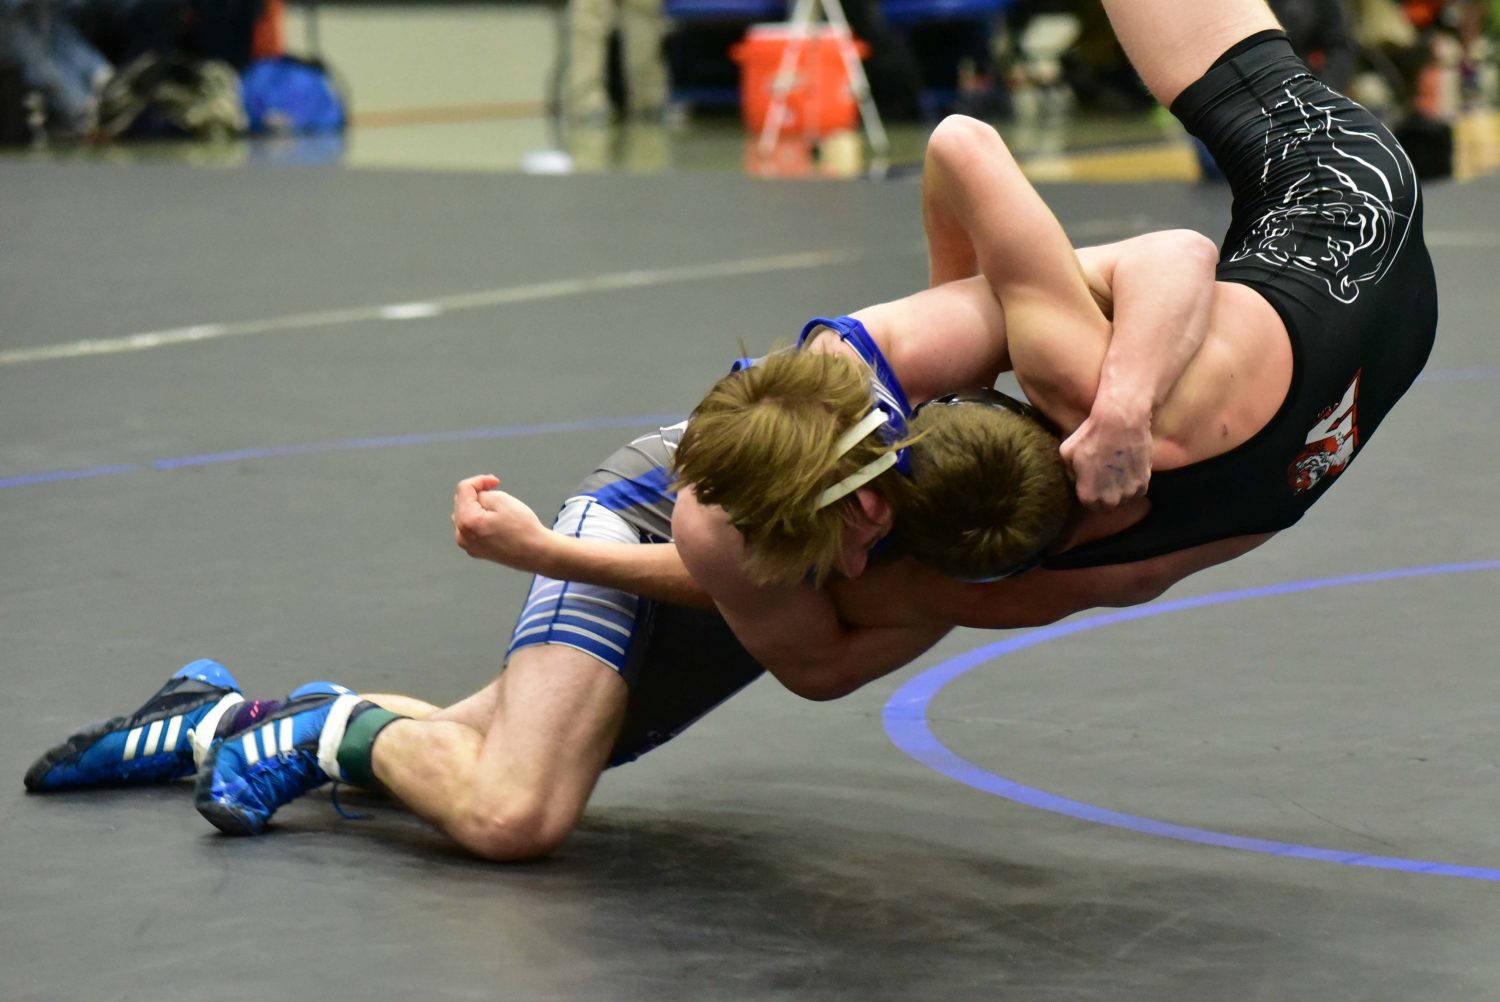 Grapplers grind it out at WVC meet